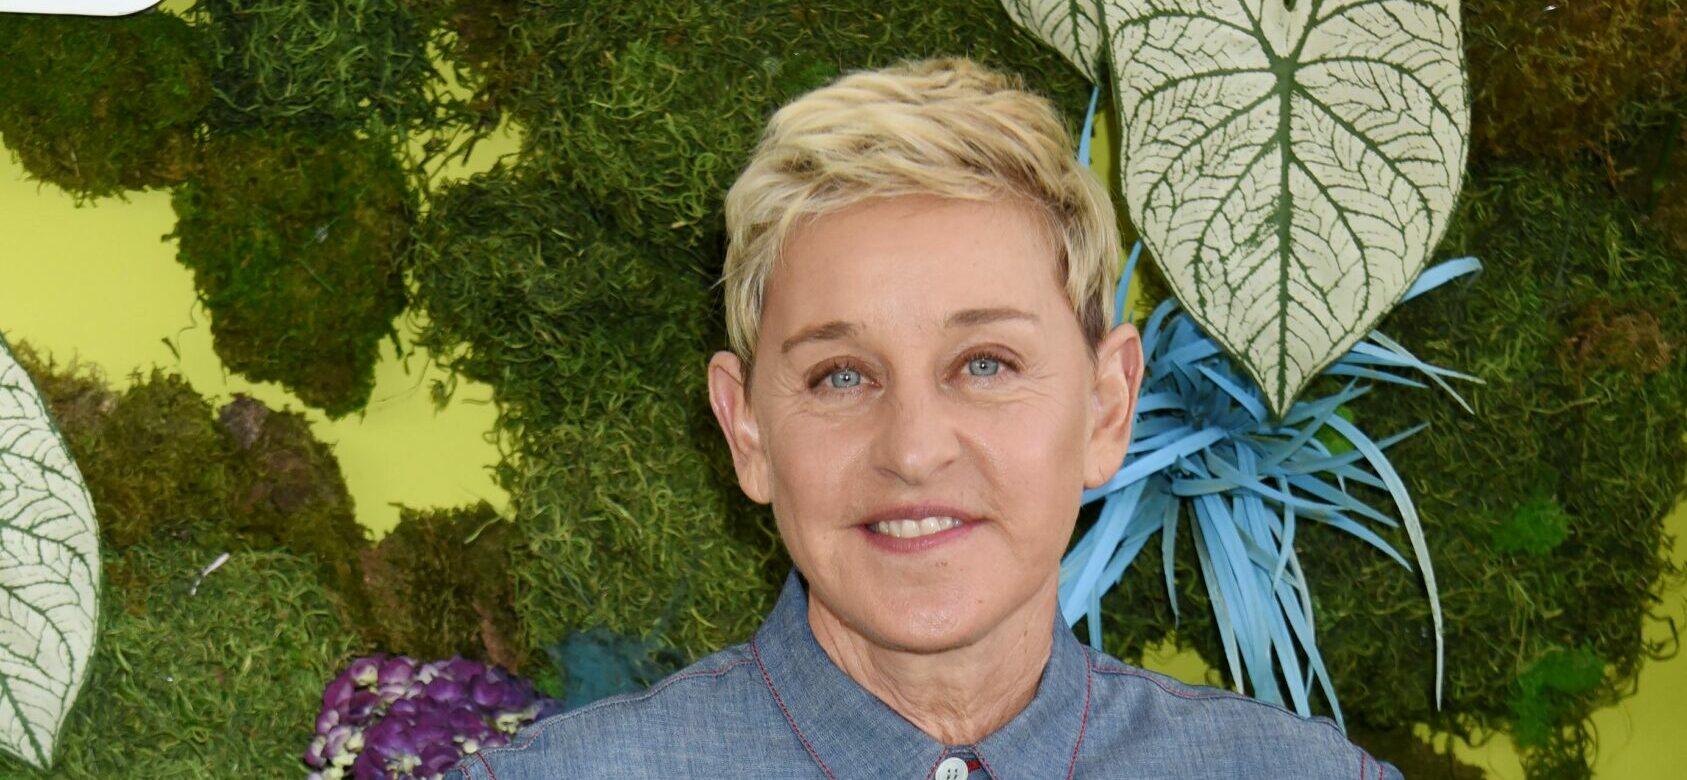 Ellen DeGeneres Admits She ‘Hated’ How Her Talk Show Ended After ‘Toxic’ Workplace Allegations